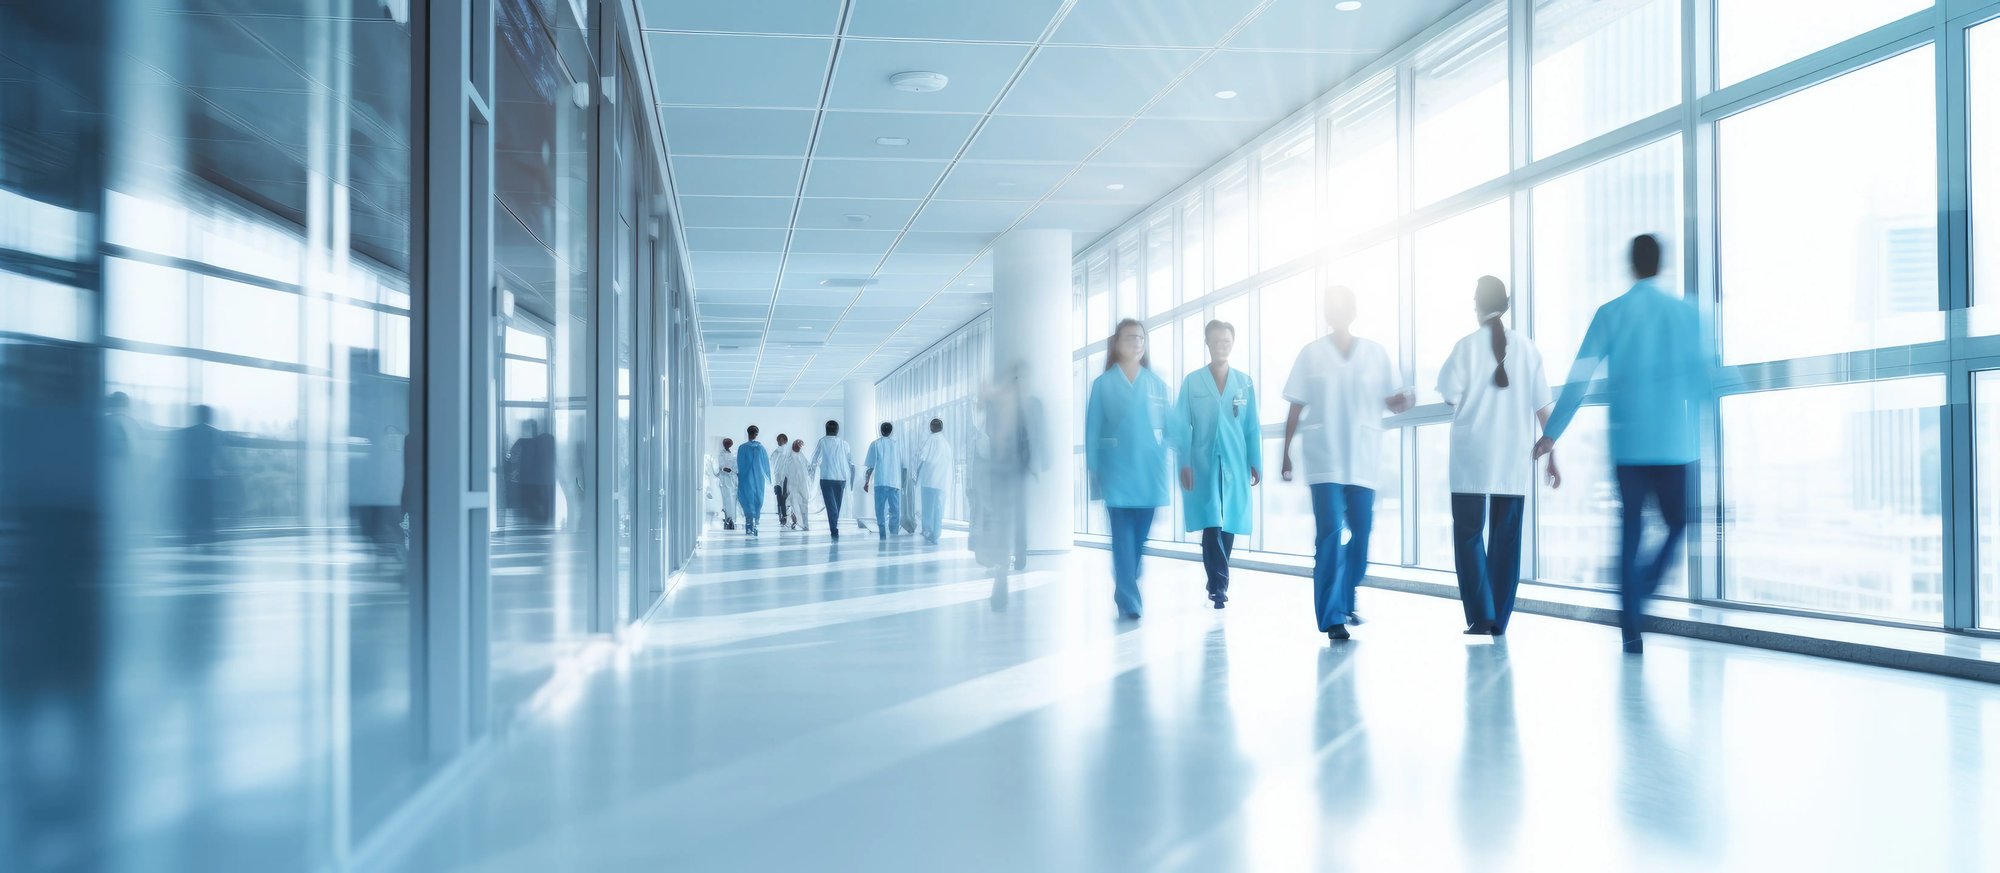 vecteezy_busy-hospital-corridor-with-diverse-doctors-in-motion_27185469_10